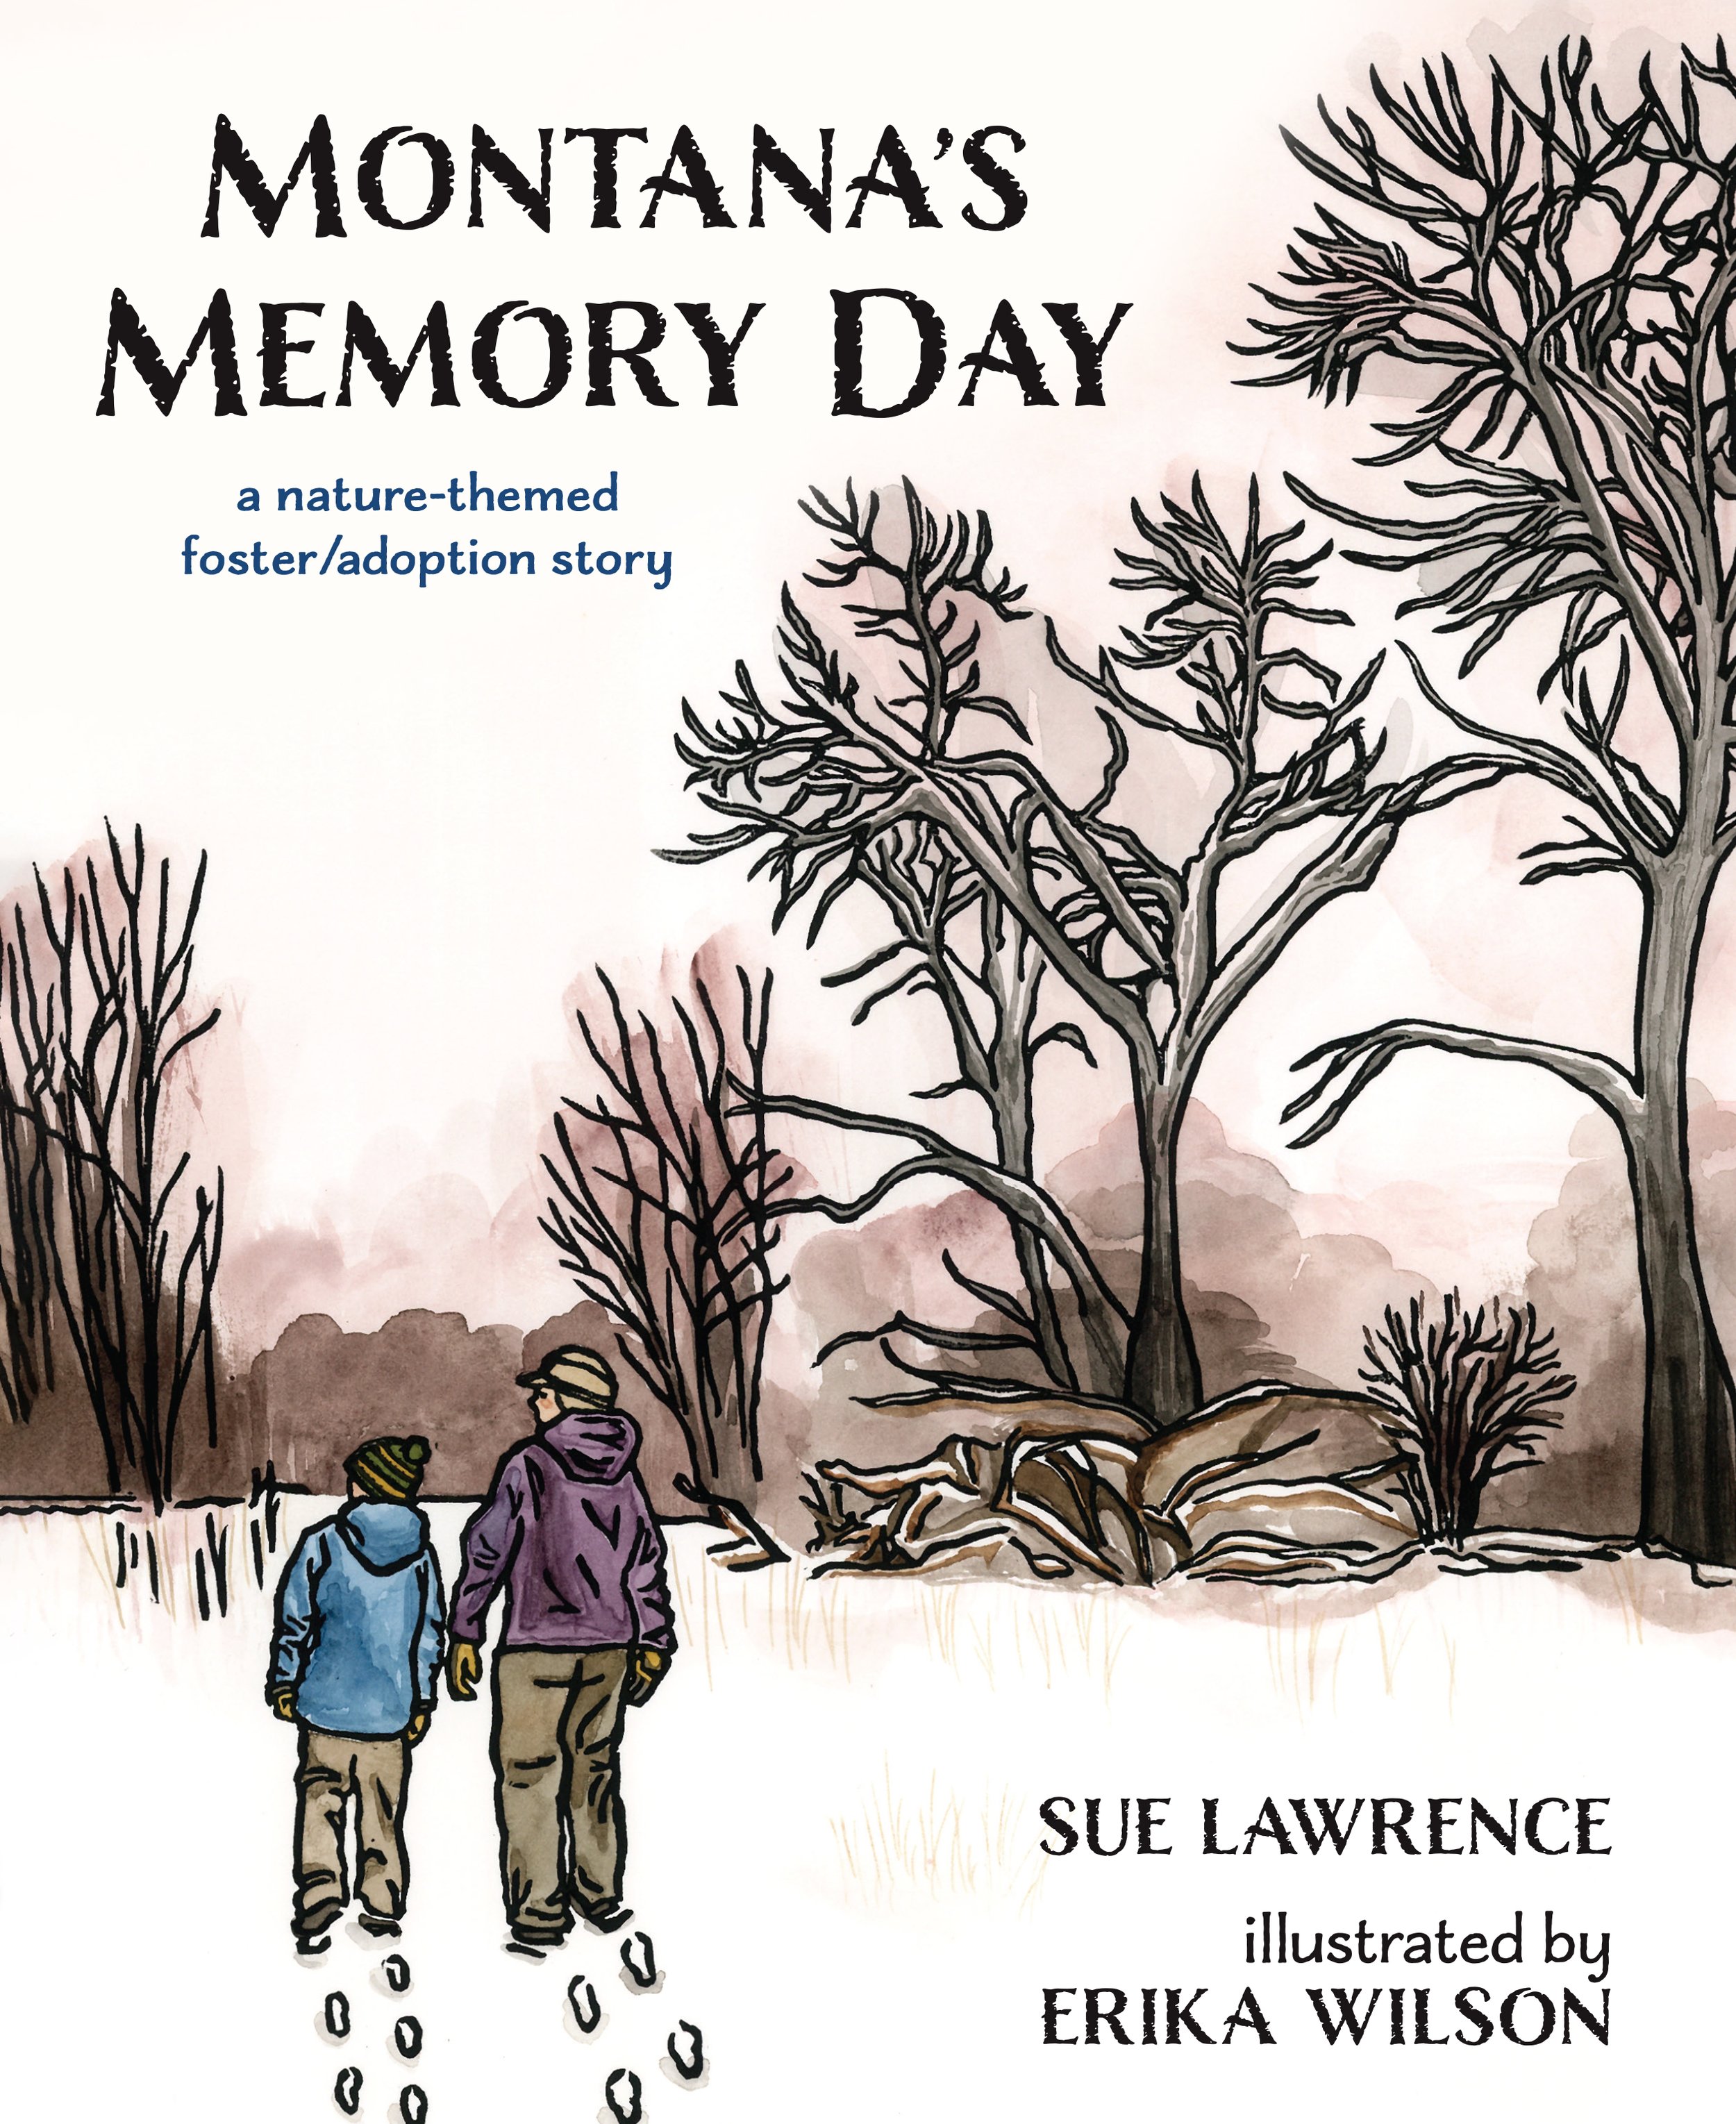 MONTANA'S MEMORY DAY by Sue Lawrence